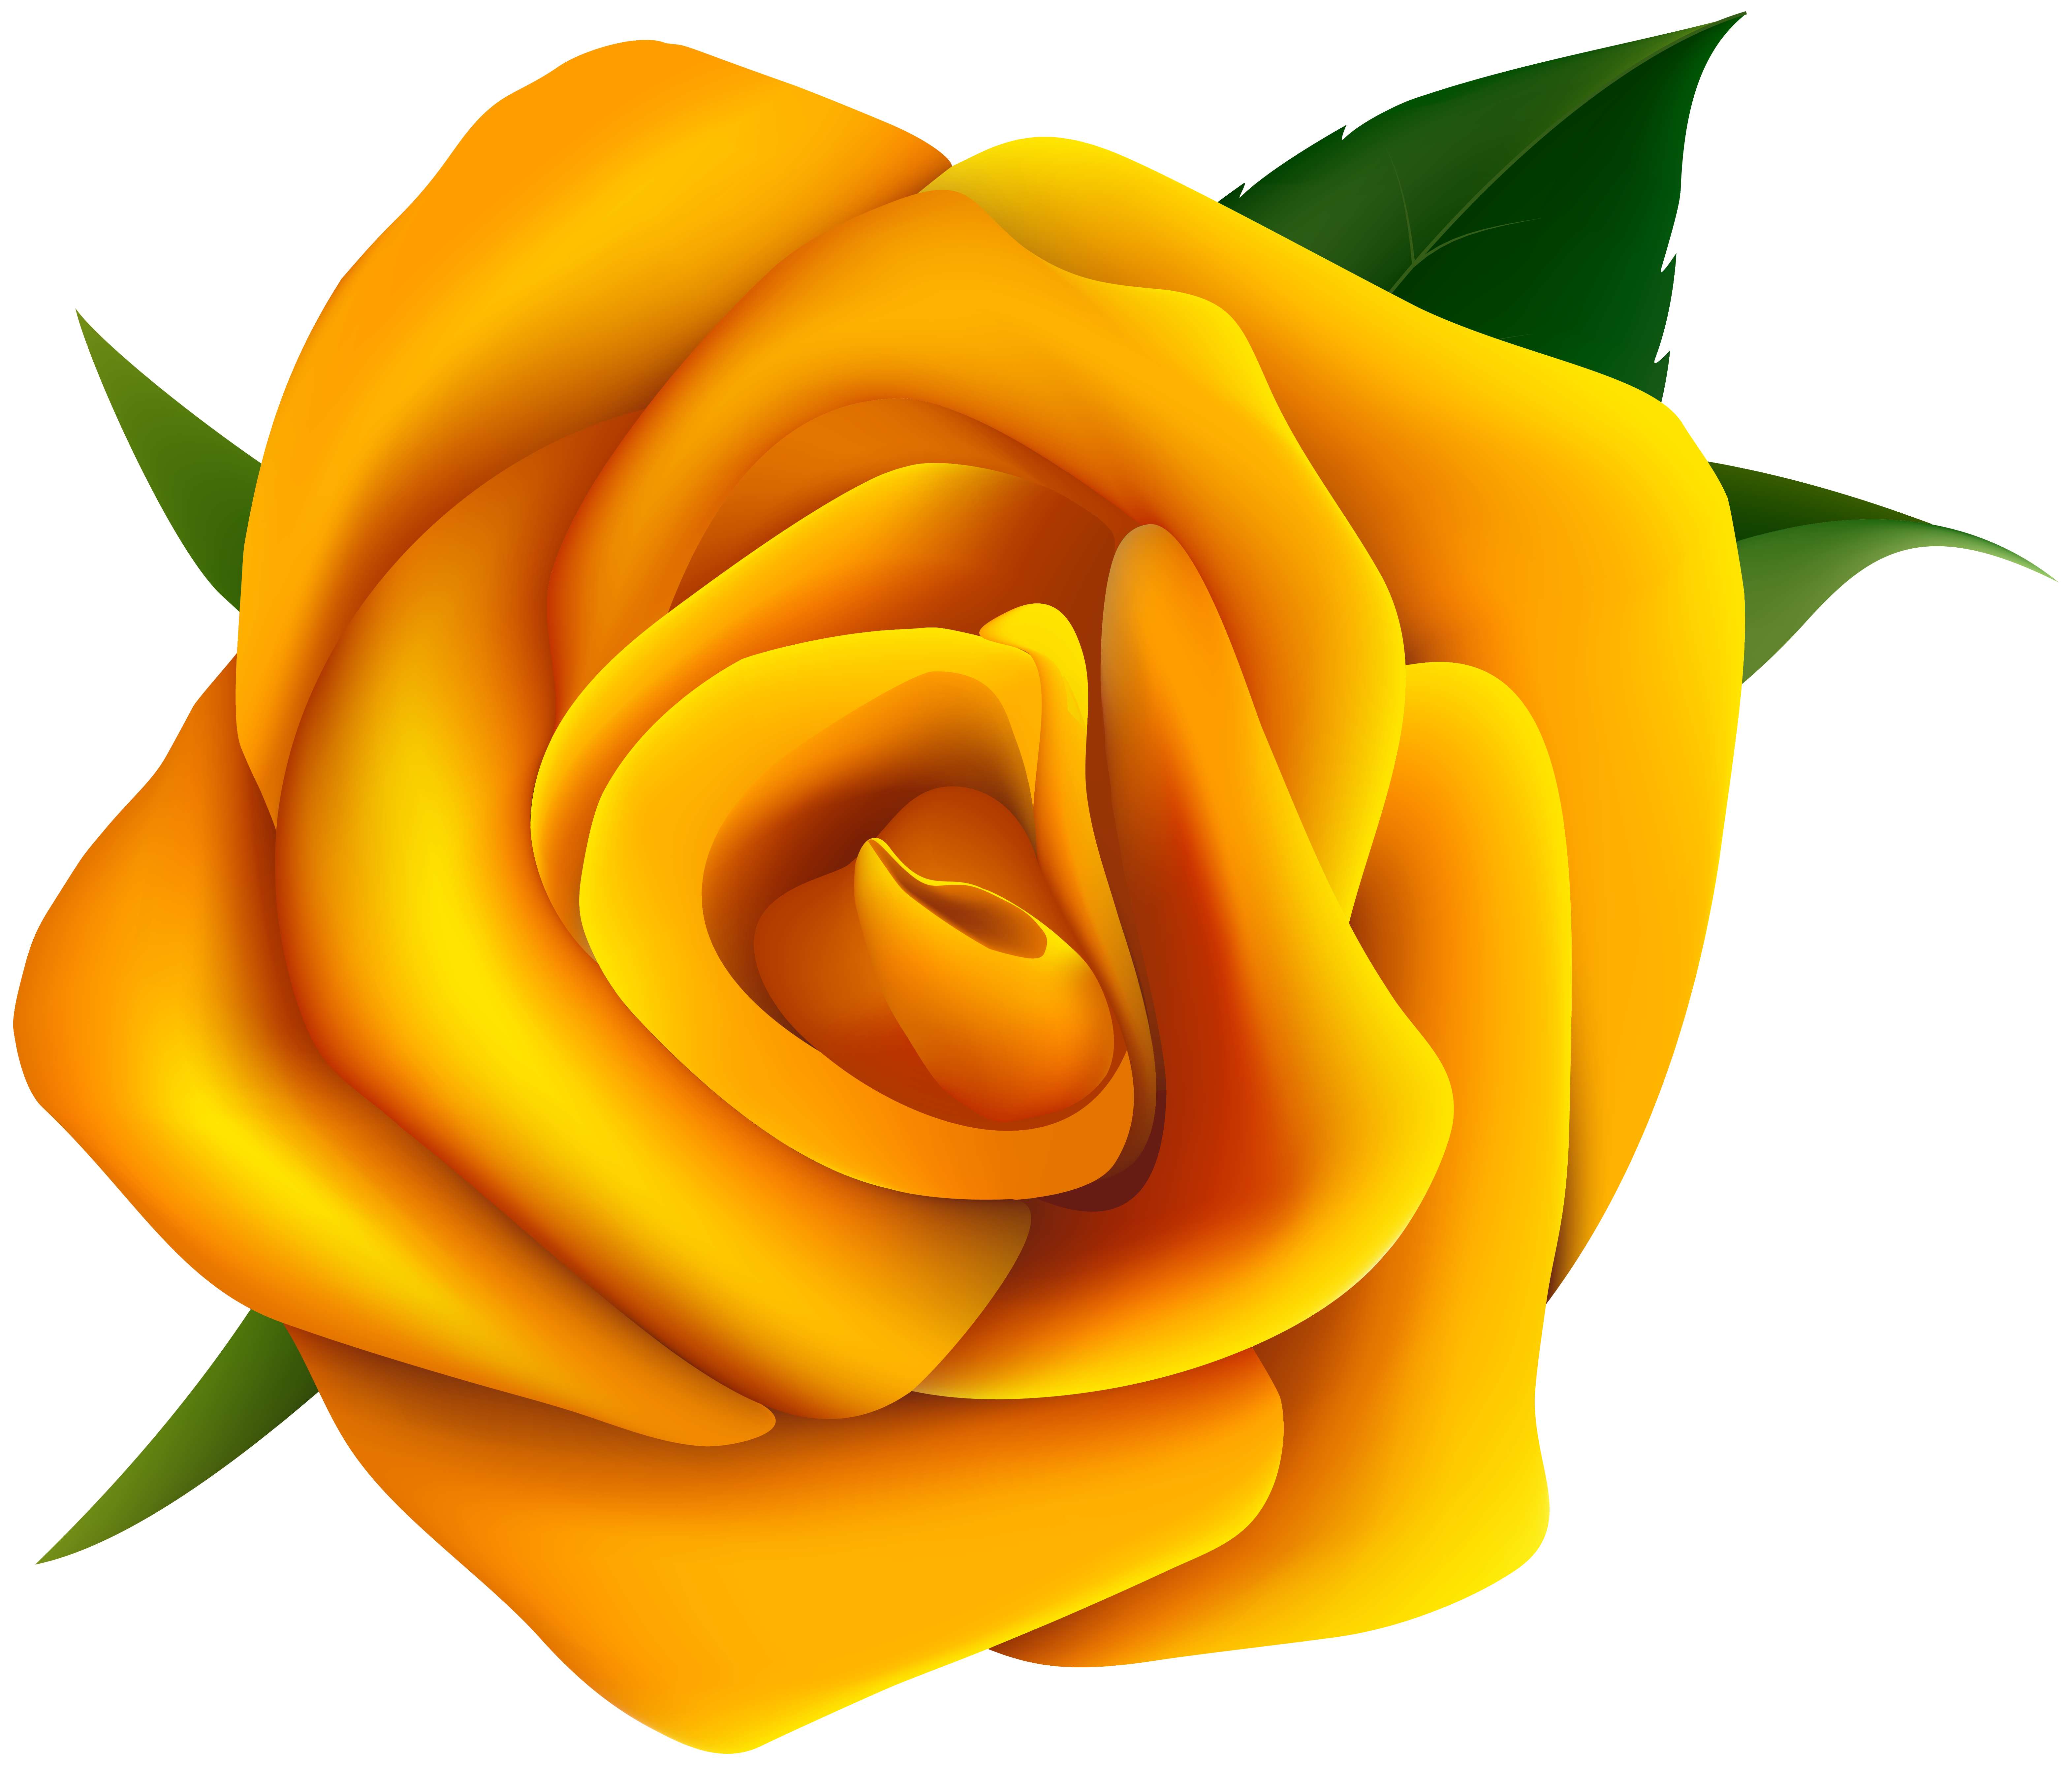 Yellow Rose clipart #4, Download drawings